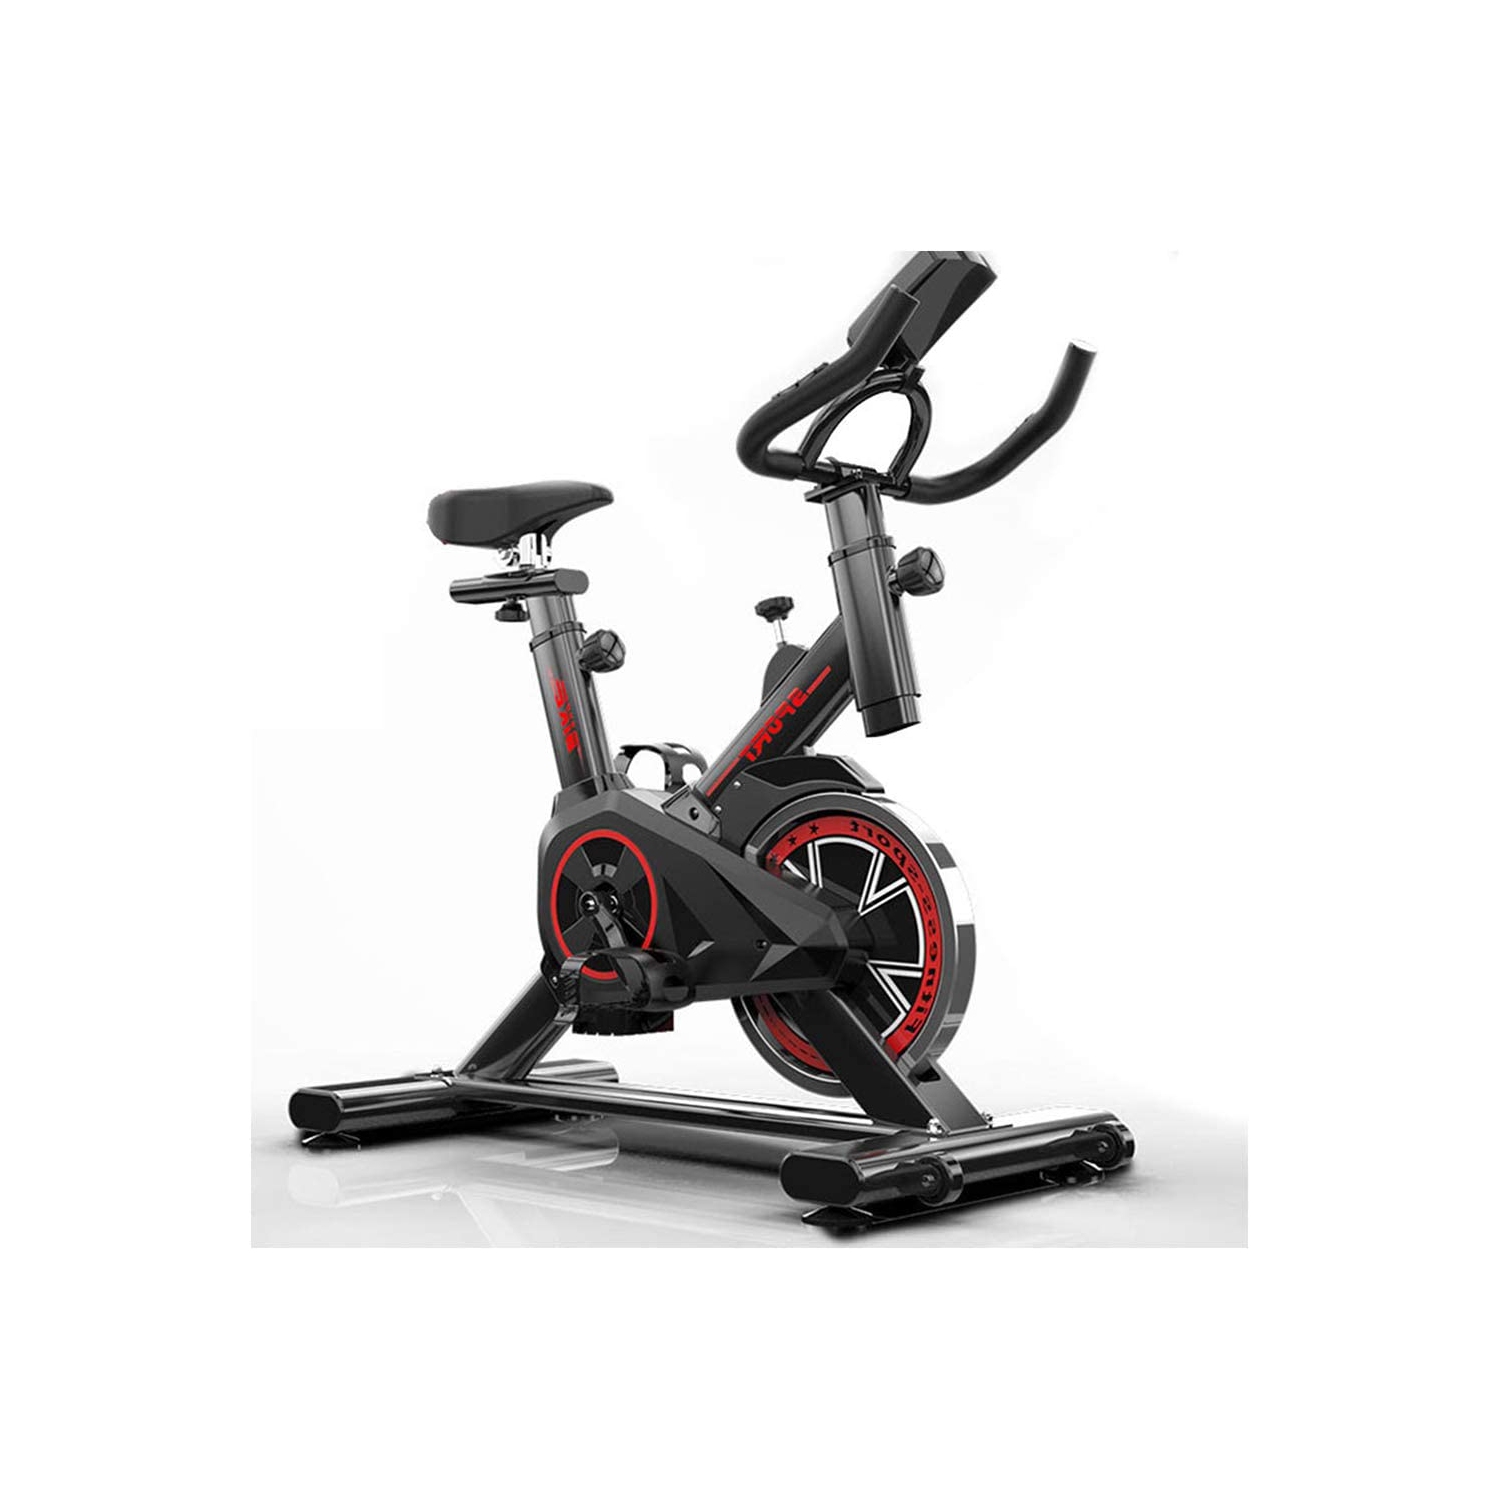 WMEB-C3 15Lbs Fly-Wheel Indoor Exercise Bike with LCD Monitor - Adjustable Seat & Handlebars - Spin Cycling Bike for Home Cardio Workout - Black